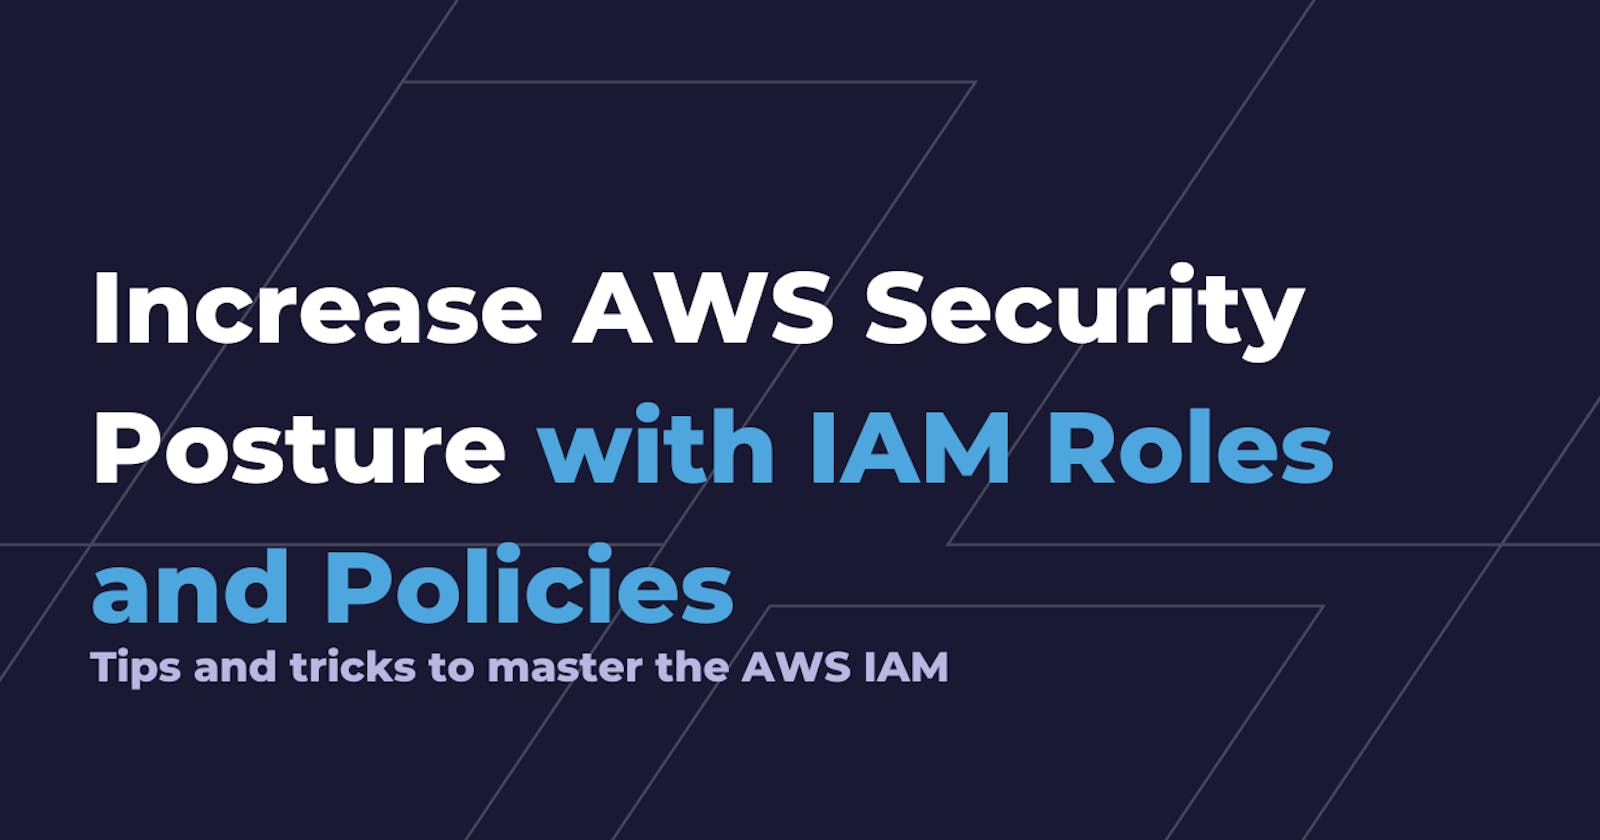 Increase AWS Security Posture with IAM Roles and Policies